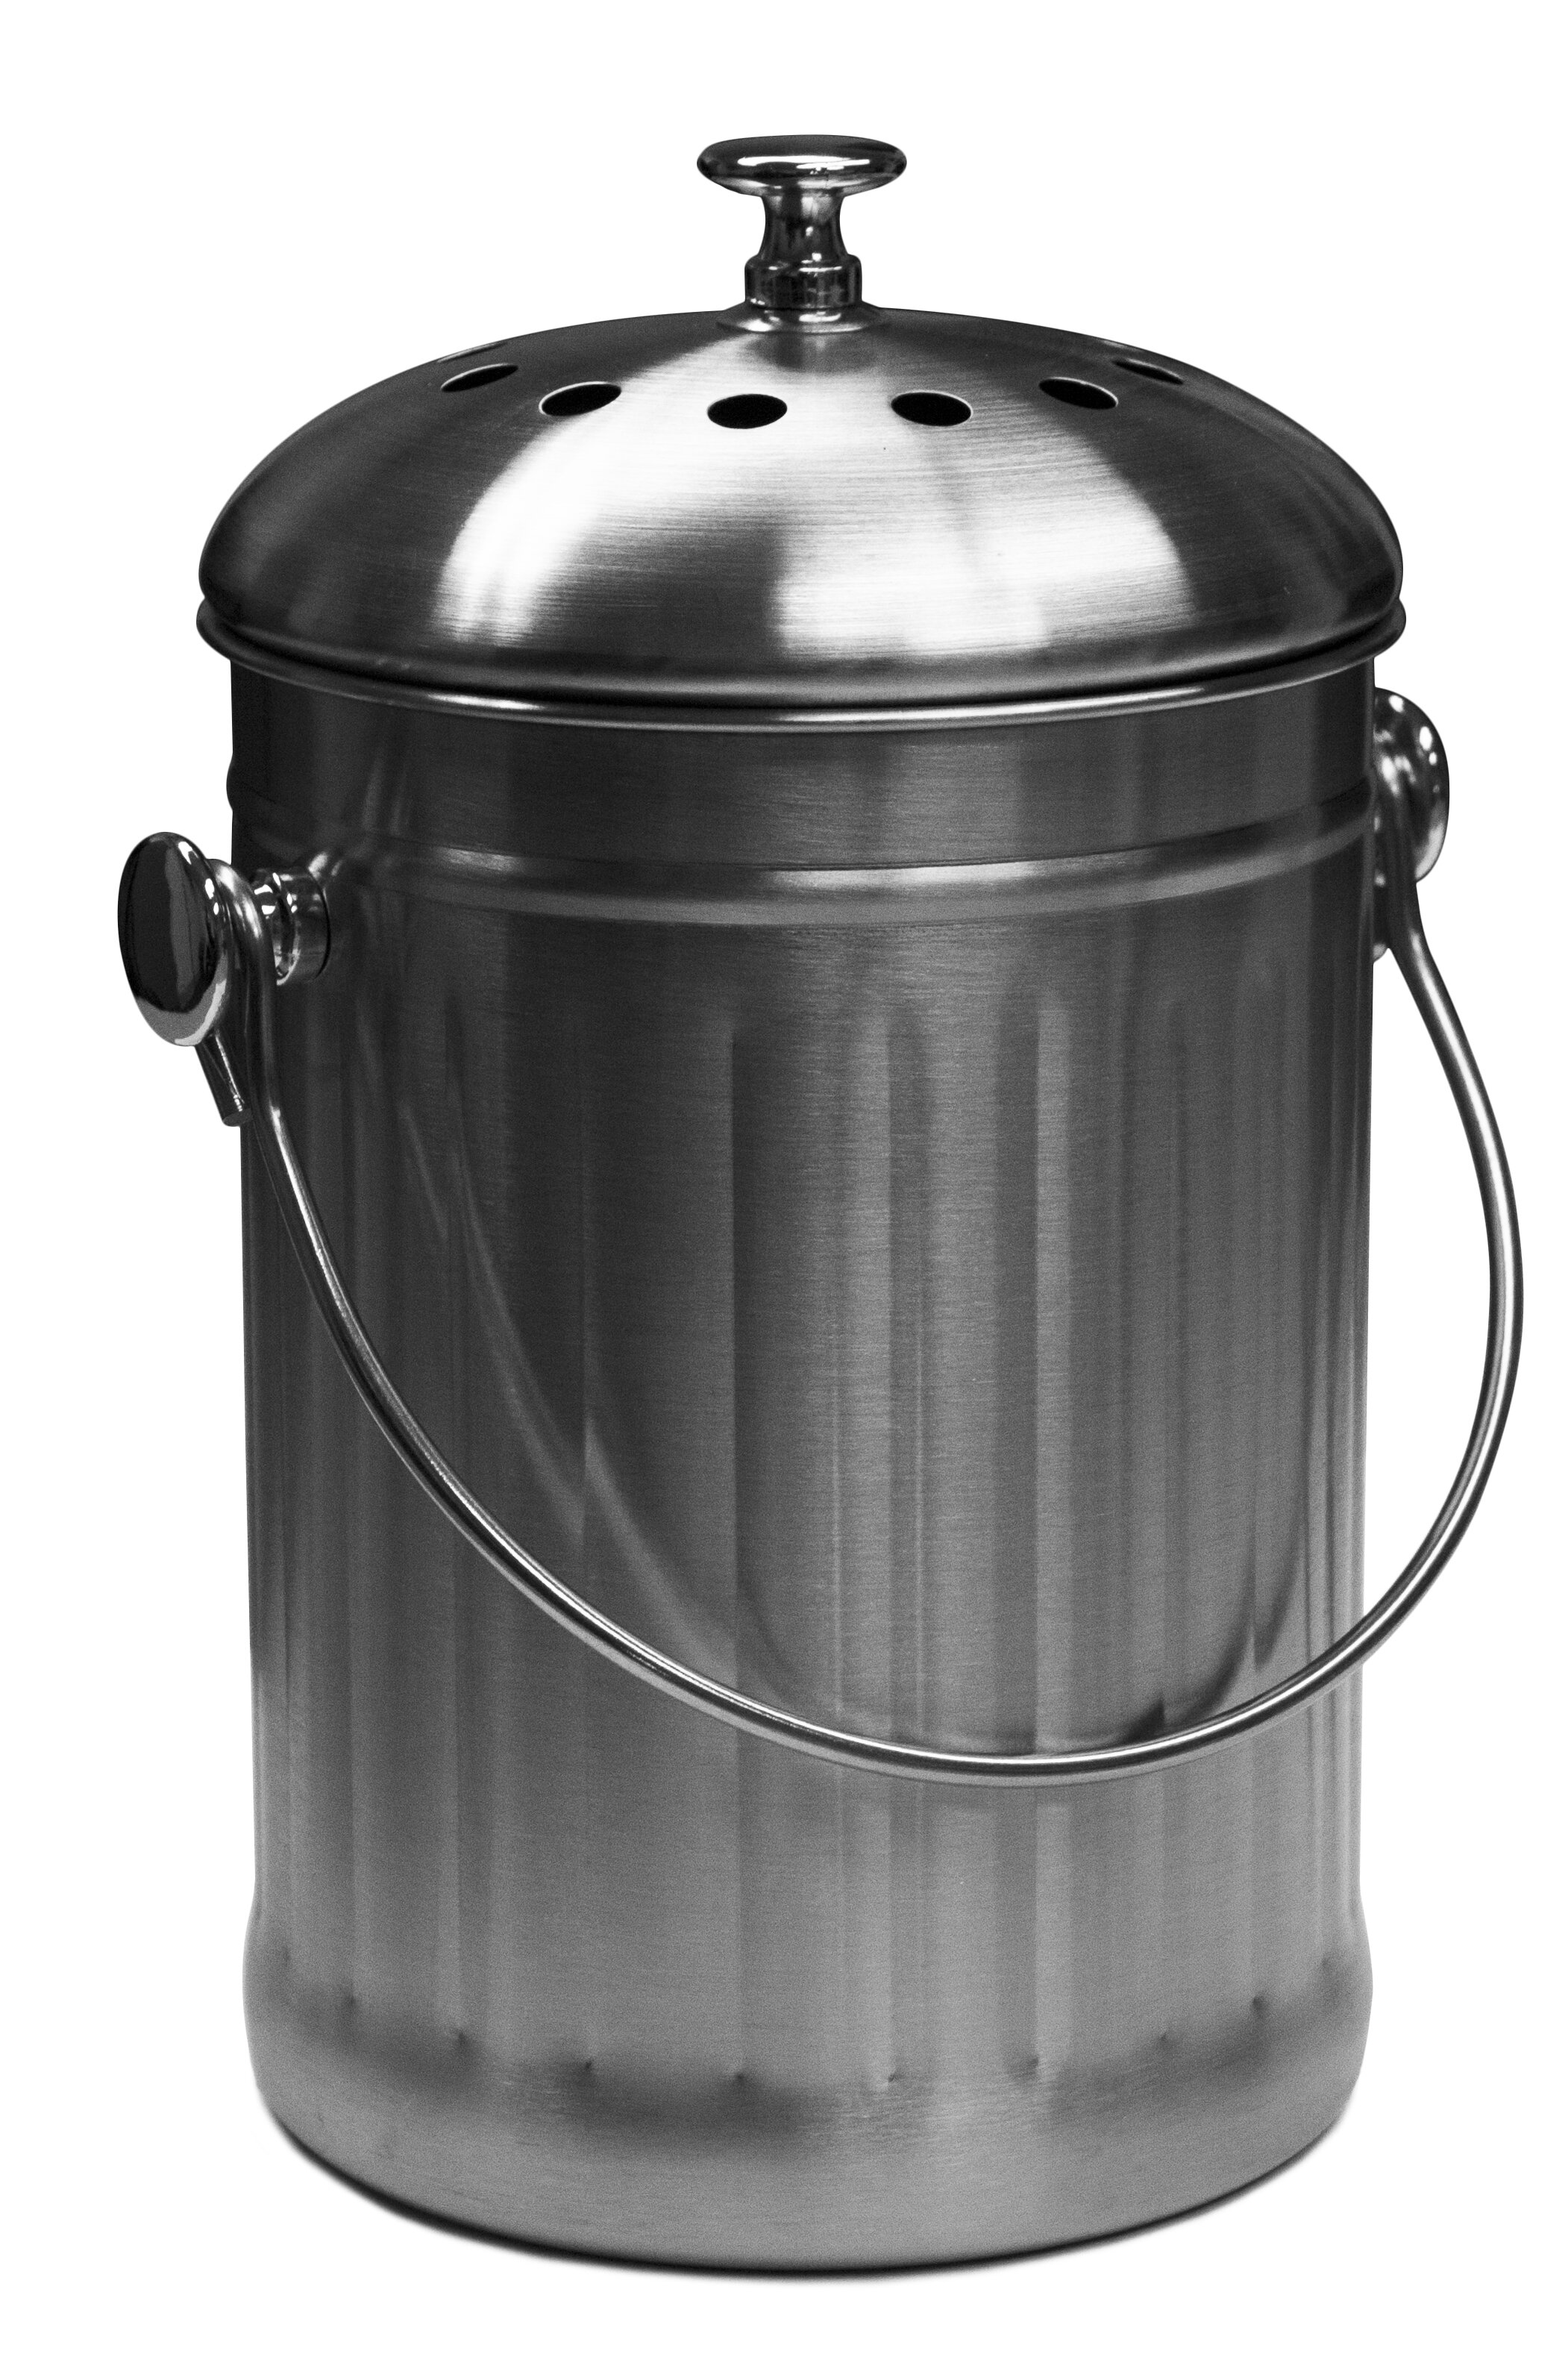 Stainless Steel Extra Large 1.5 Gallon Compost Pail from RSVP.